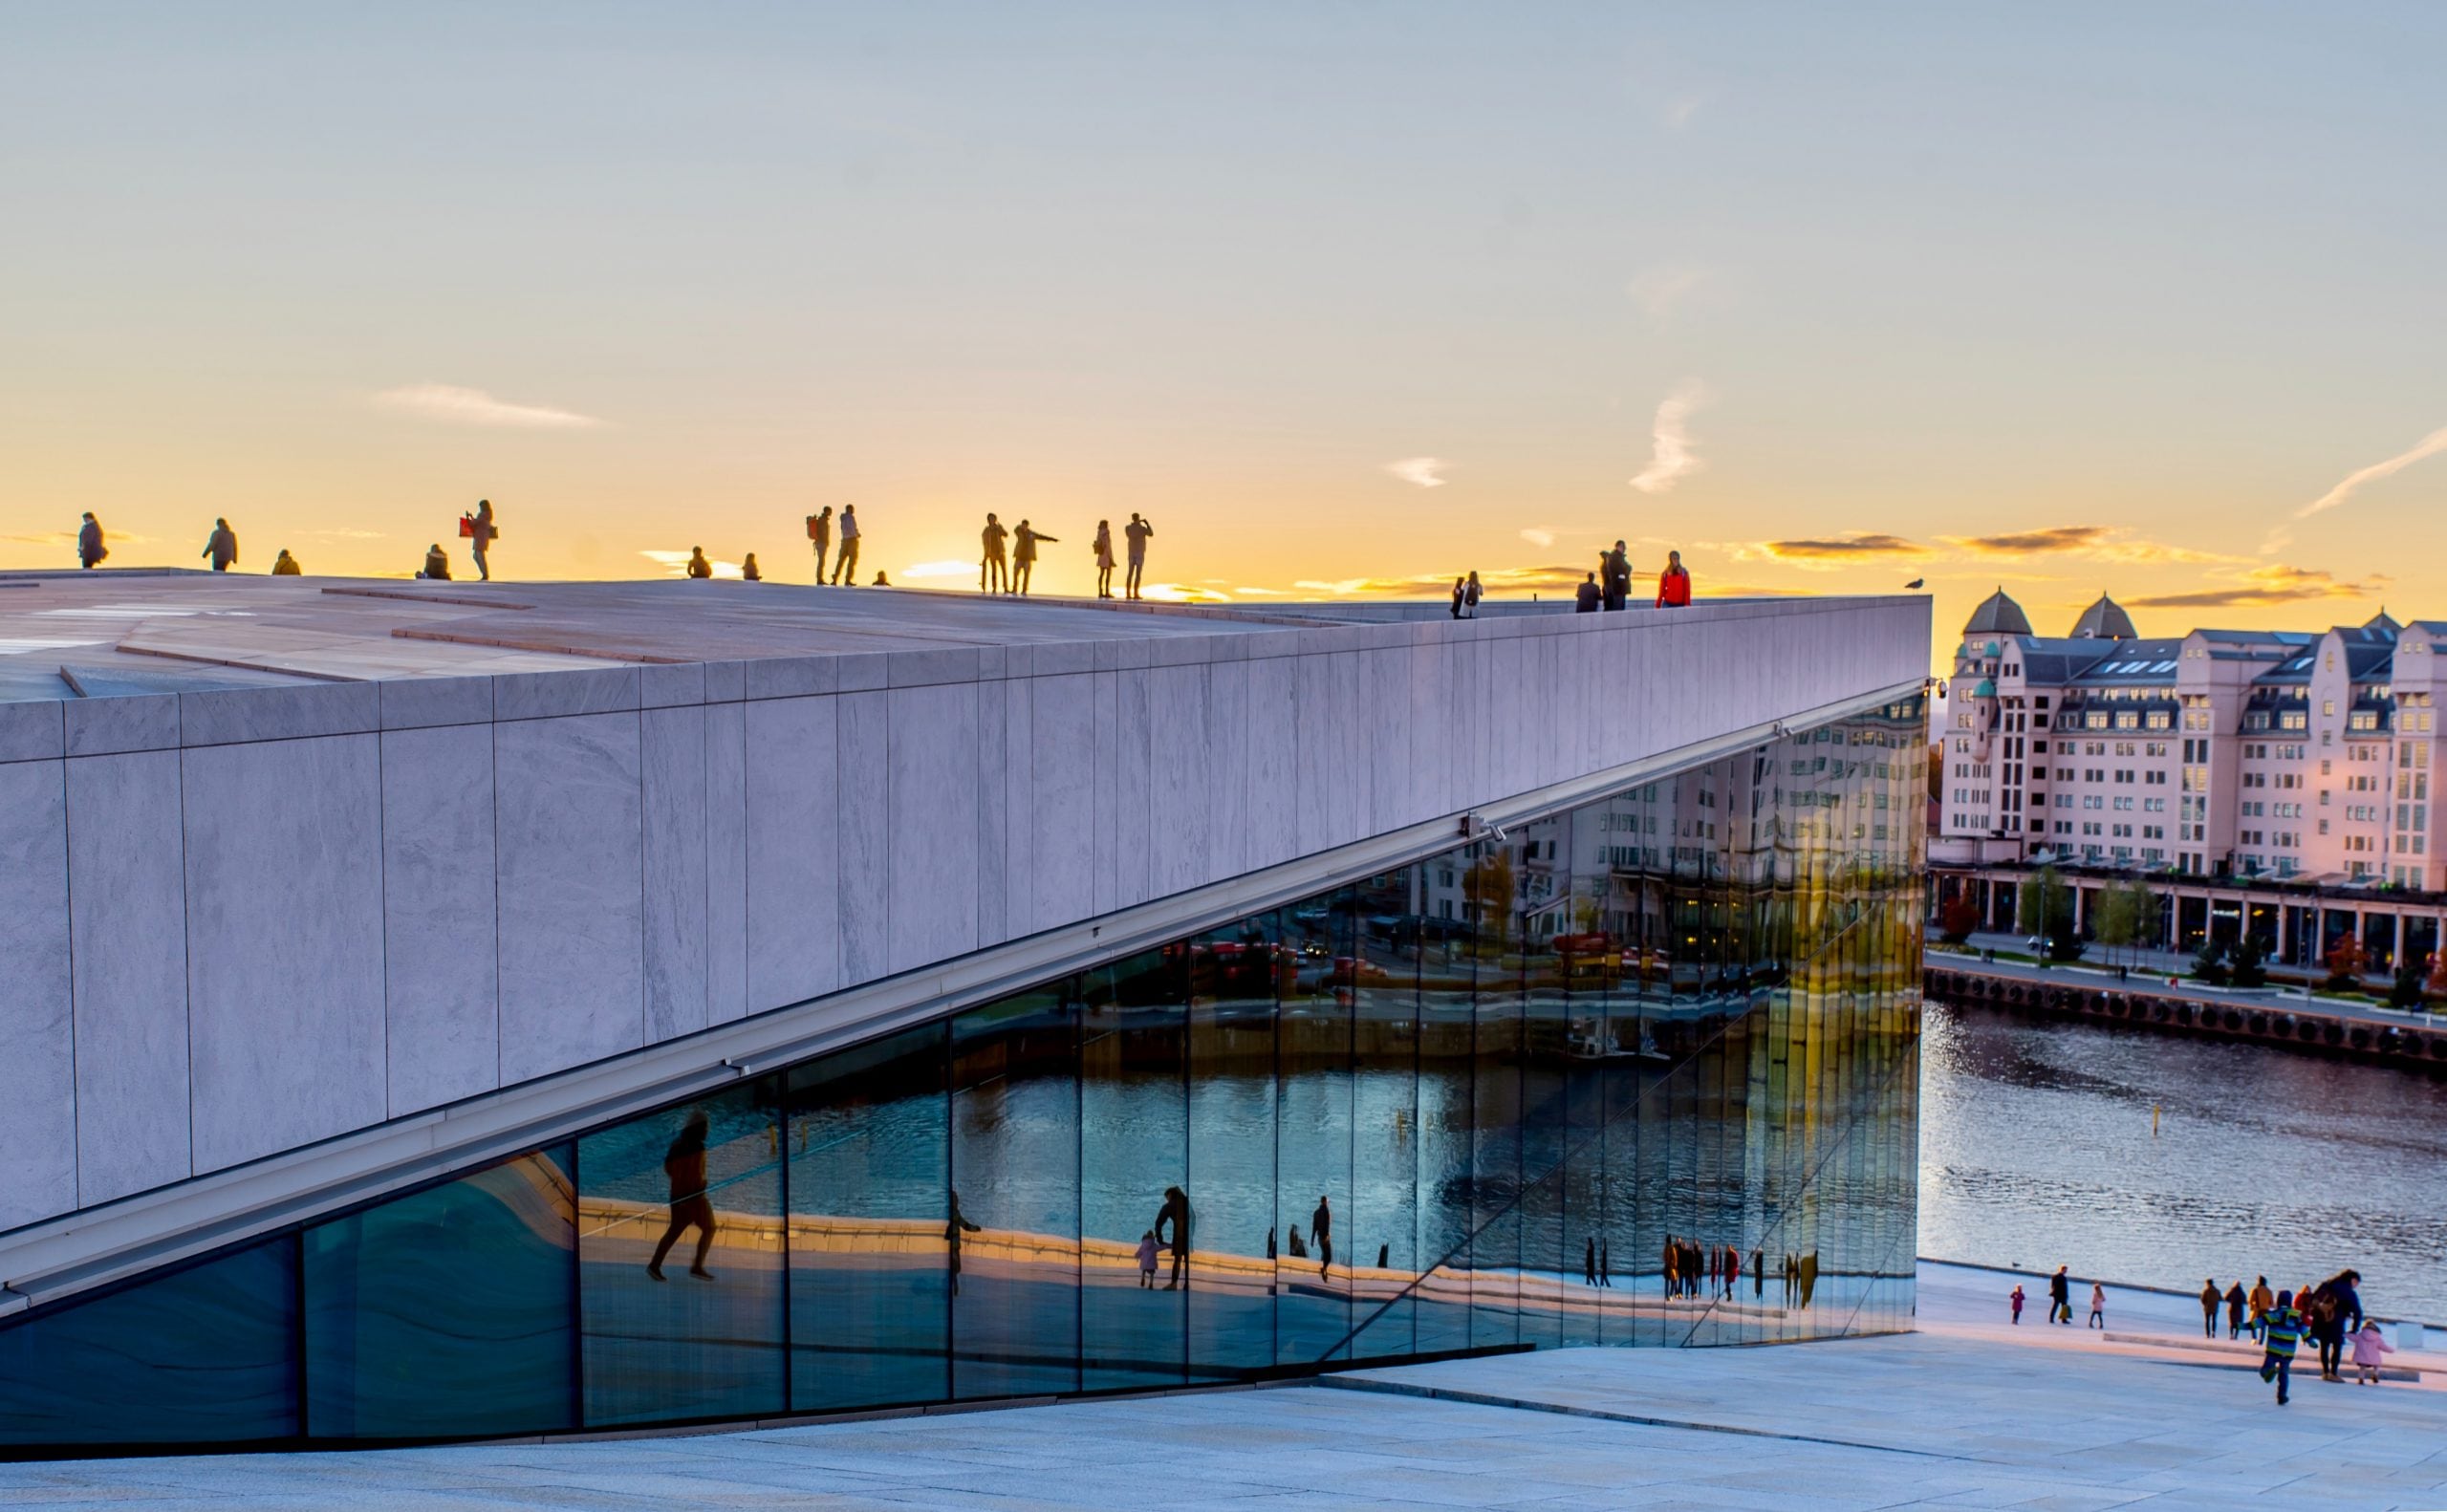 If youre exploring the Opera house in Oslo which countrys capital city are you in scaled